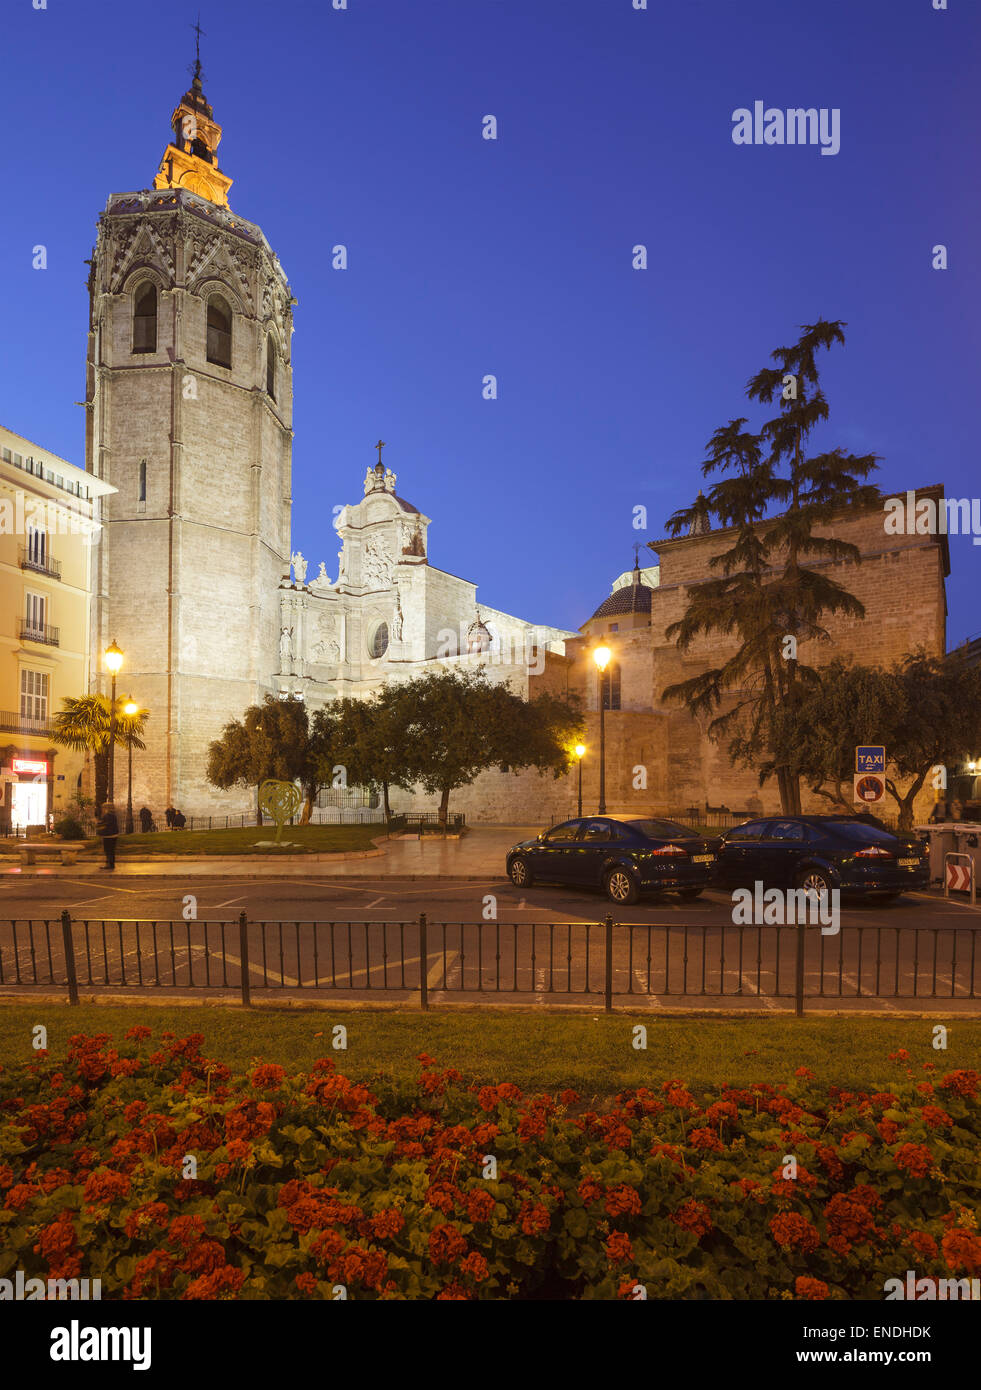 Saint Mary's Cathedral, Valencia, Espagne Banque D'Images